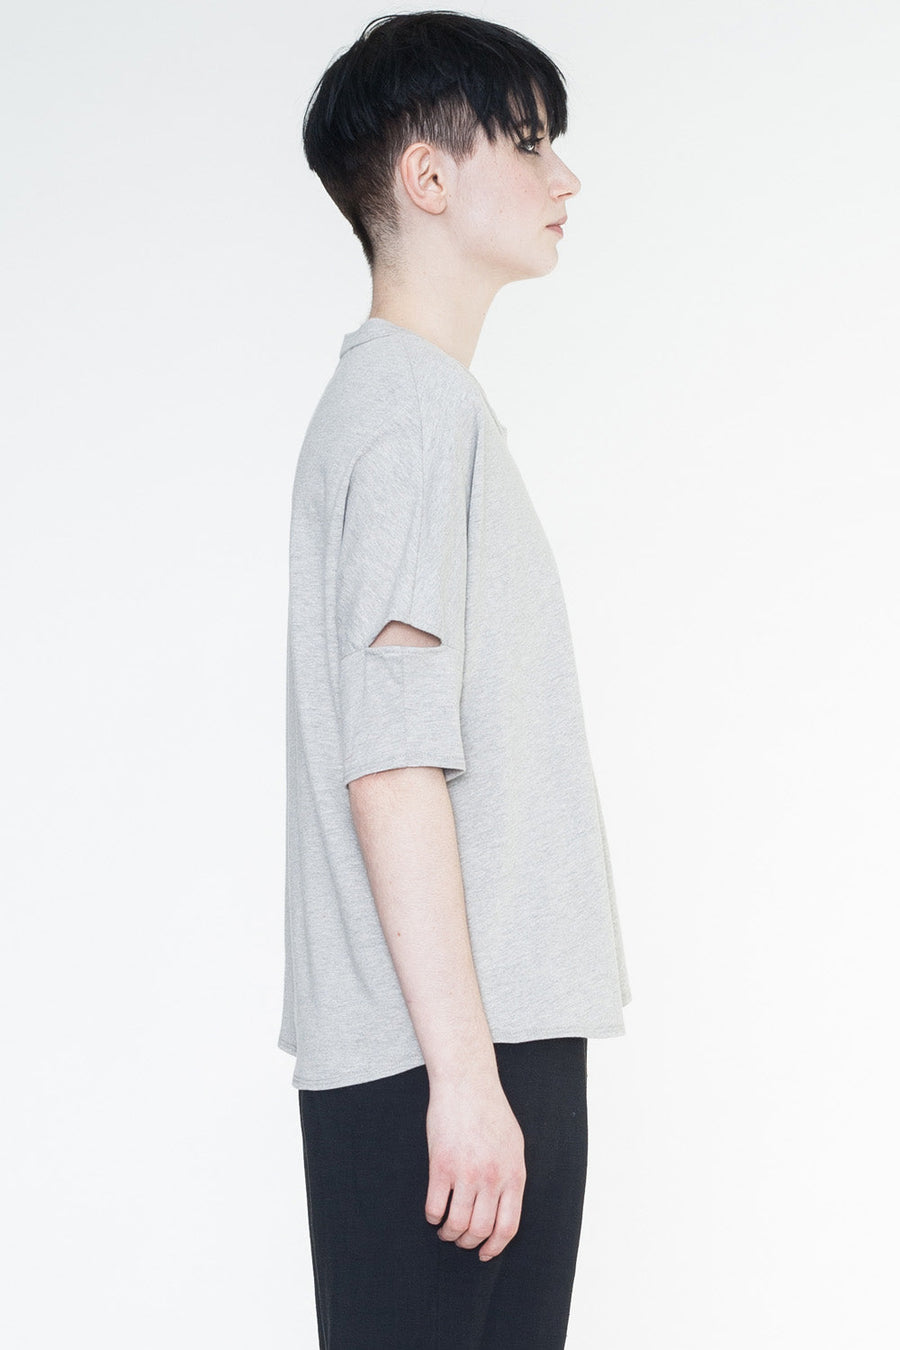 Defect | Fawn Top | S